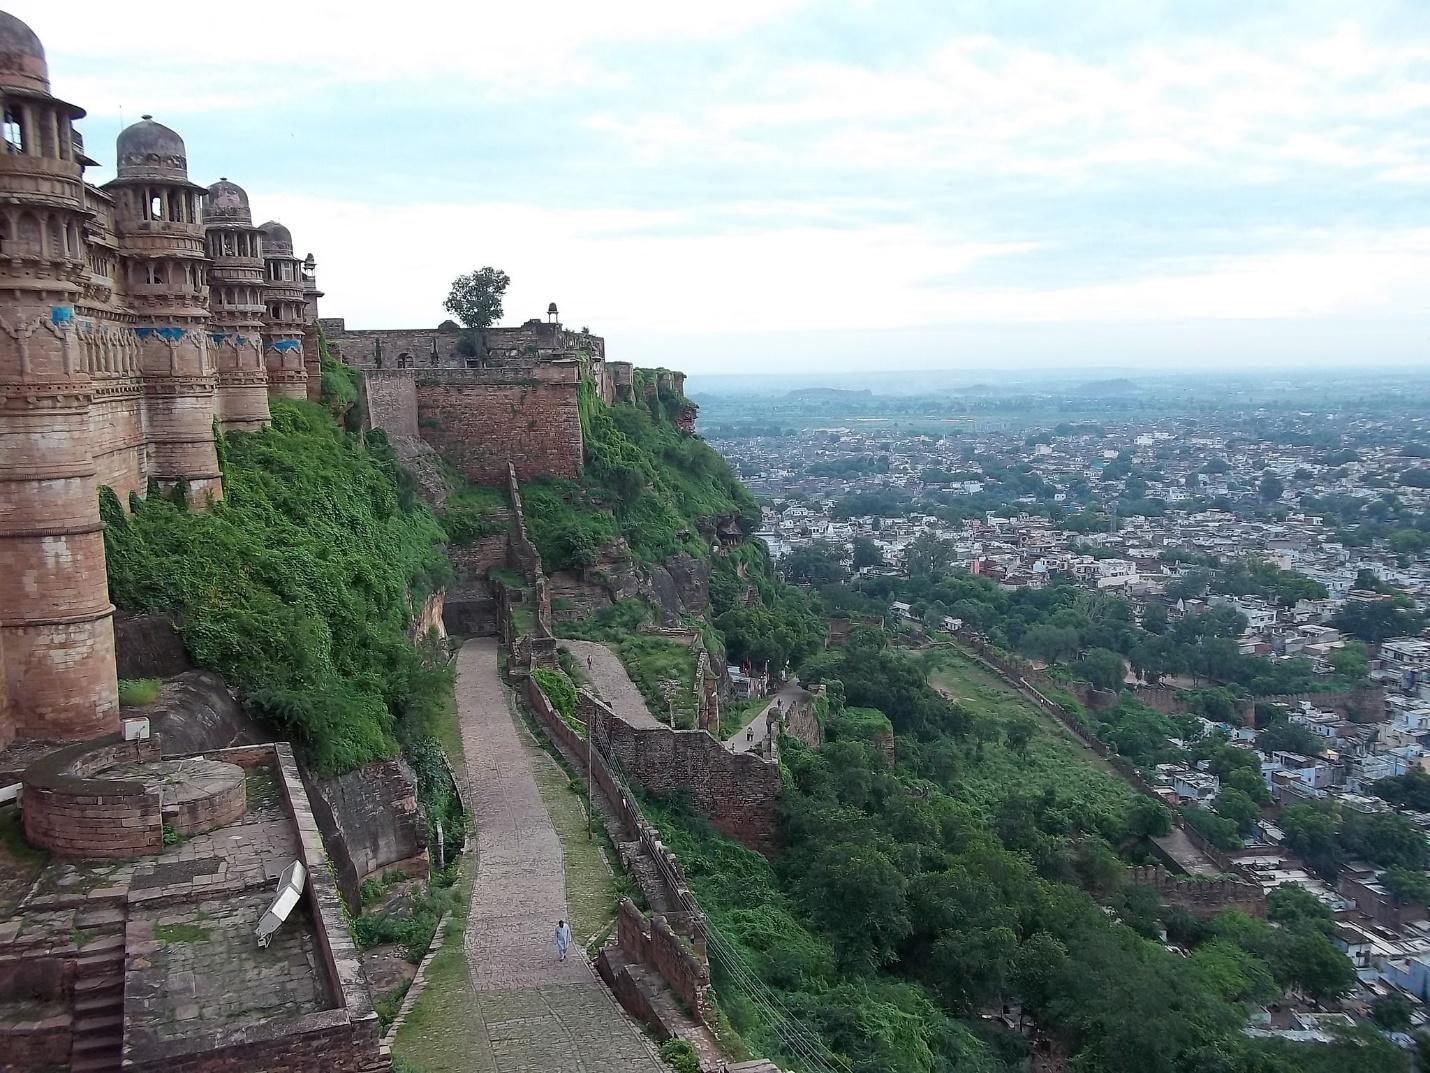 How to Spend 48 Hours in Gwalior, India